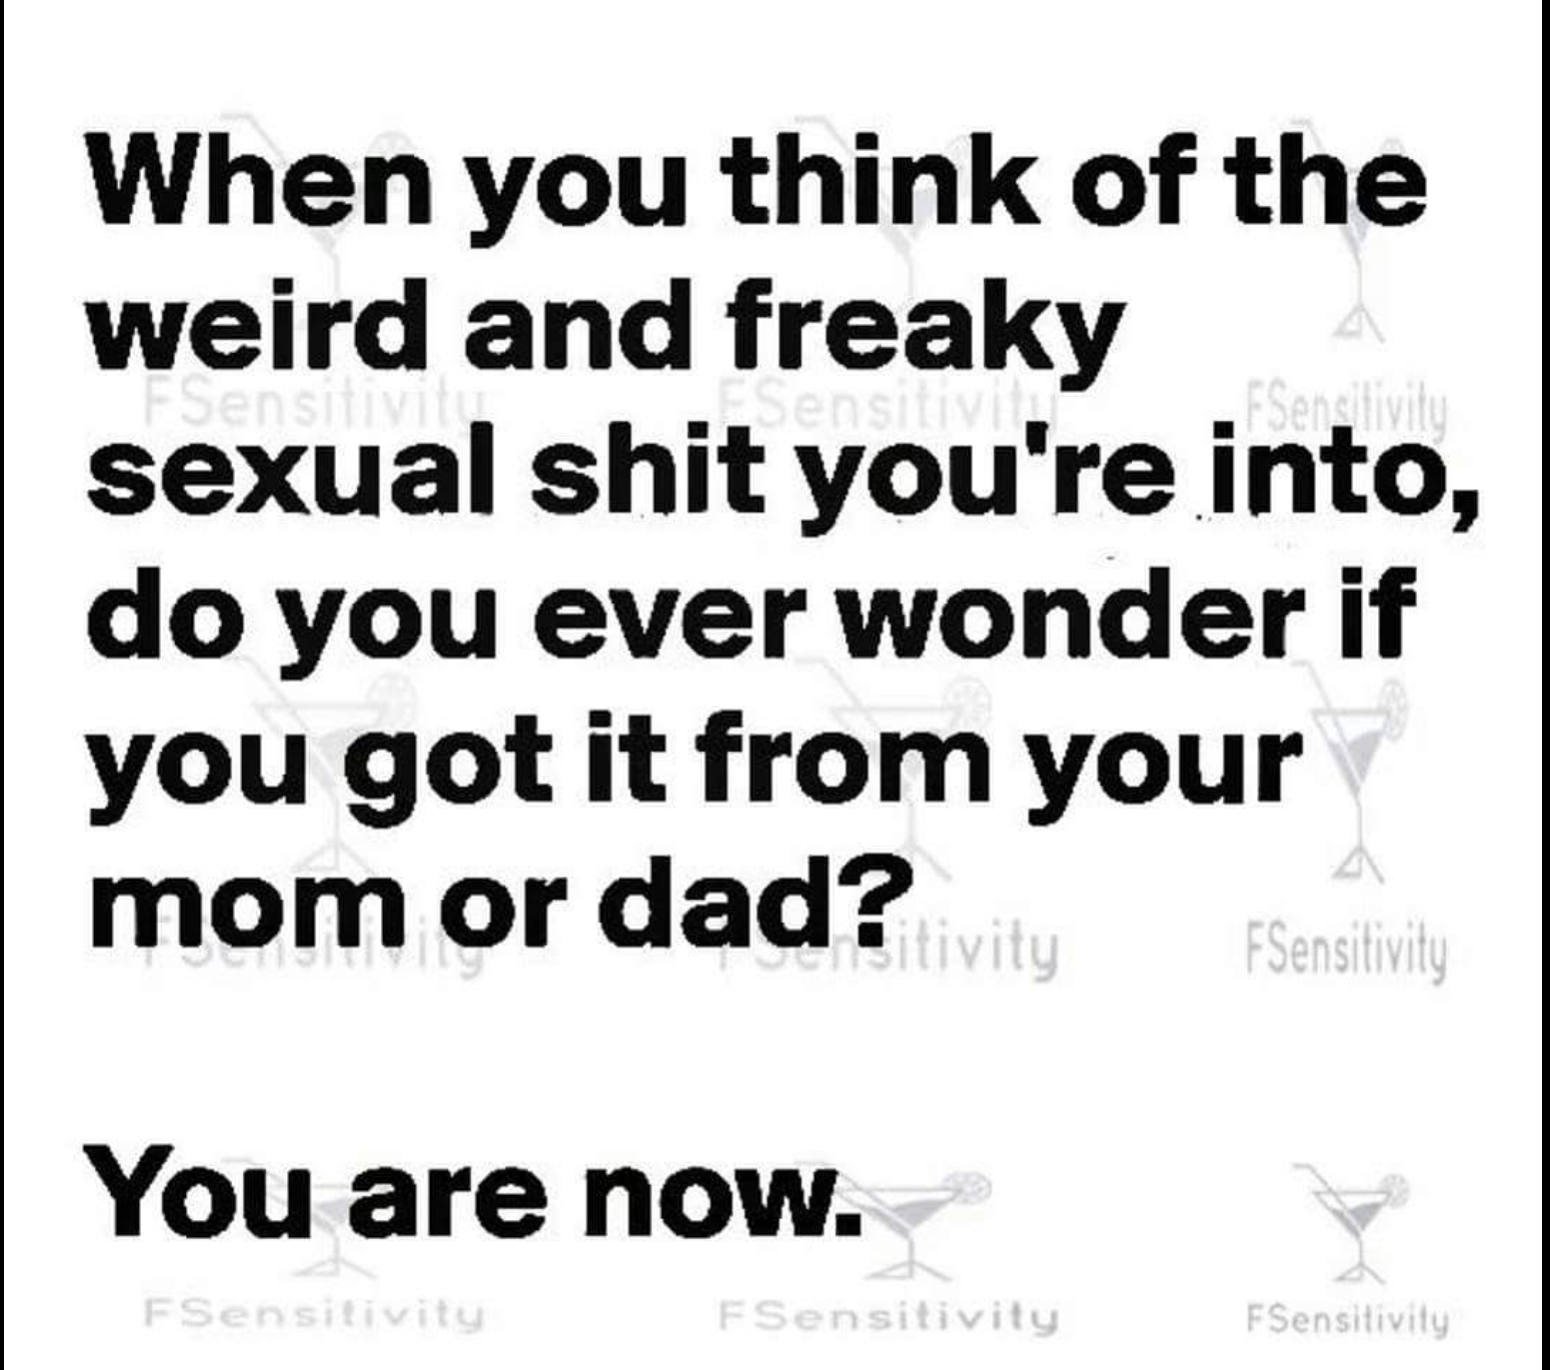 dirty meme games - When you think of the weird and freaky sexual shit you're into, do you ever wonder if you got it from your m om or dad? ivity Sensitivity You are now. FSensitivity FSensitivity FSensitivity